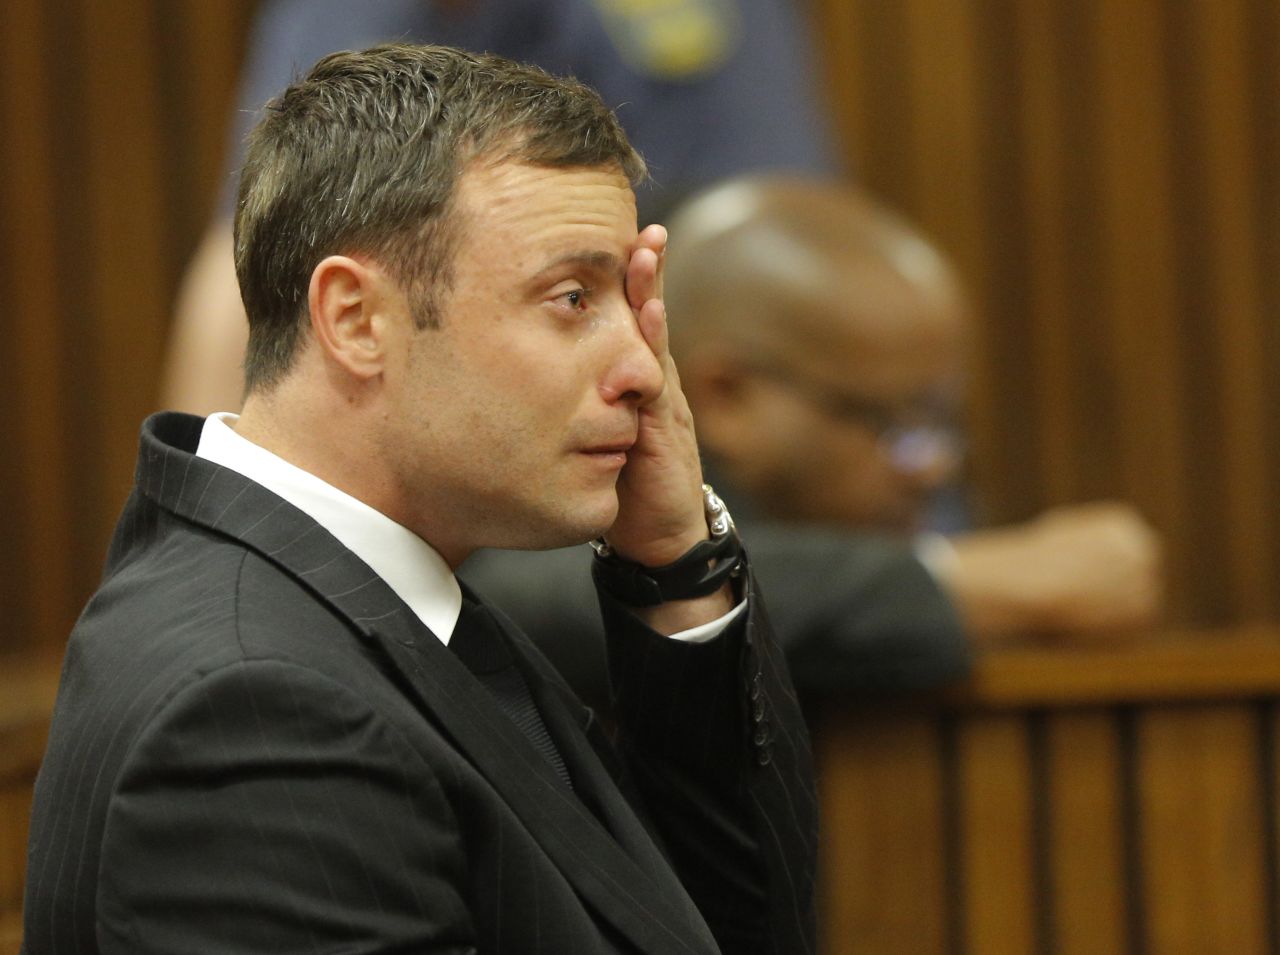 Pistorius cries on the stand in Pretoria on Thursday, September 11, as the judge reads notes while delivering her verdict.